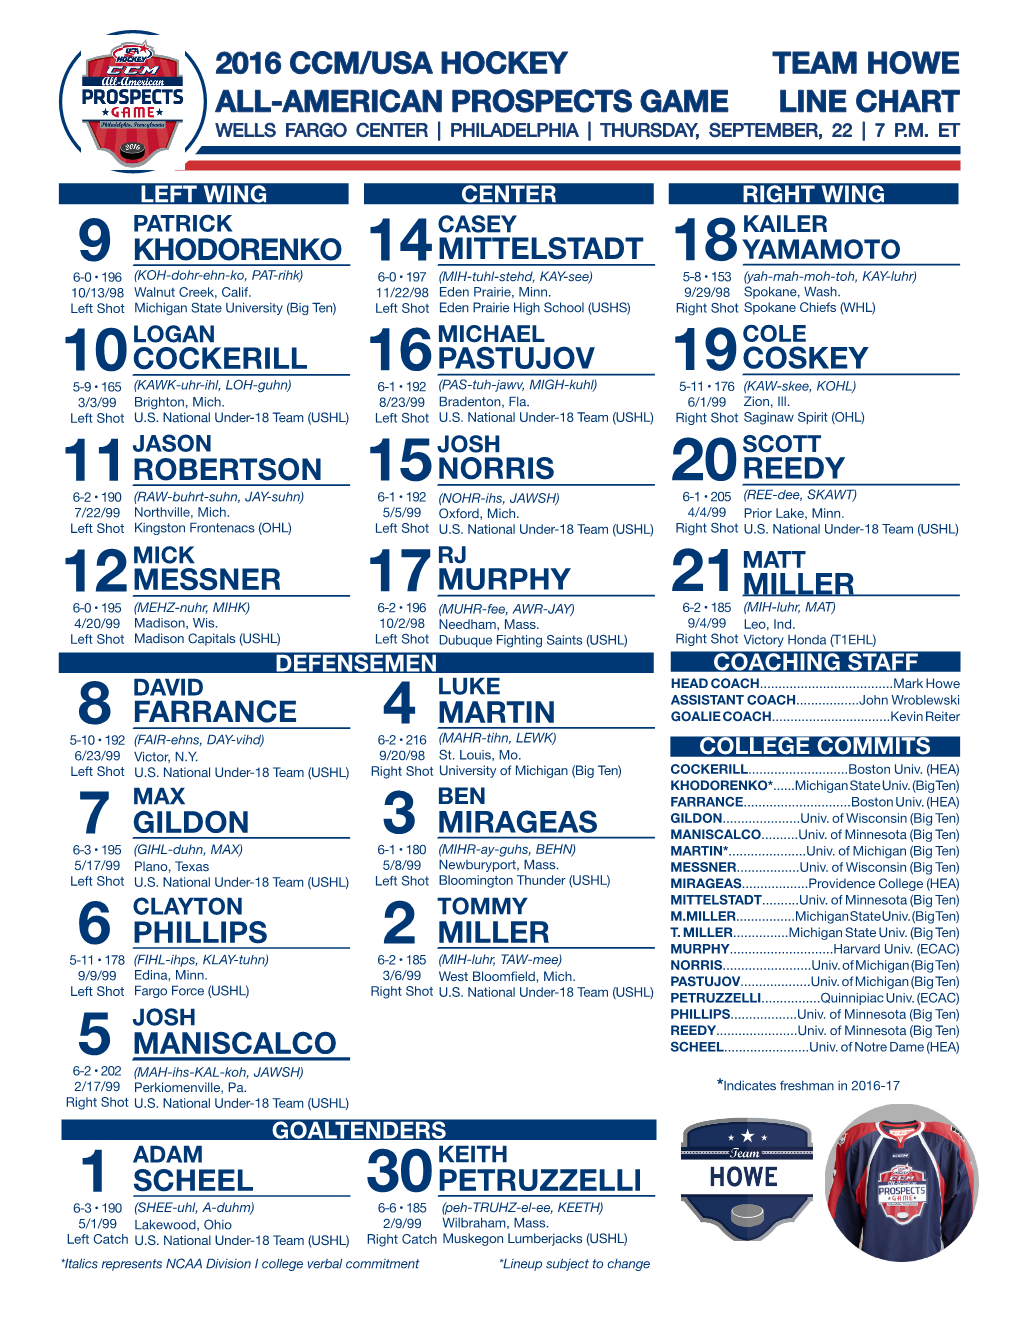 Team Howe Line Chart 2016 Ccm/Usa Hockey All-American Prospects Game